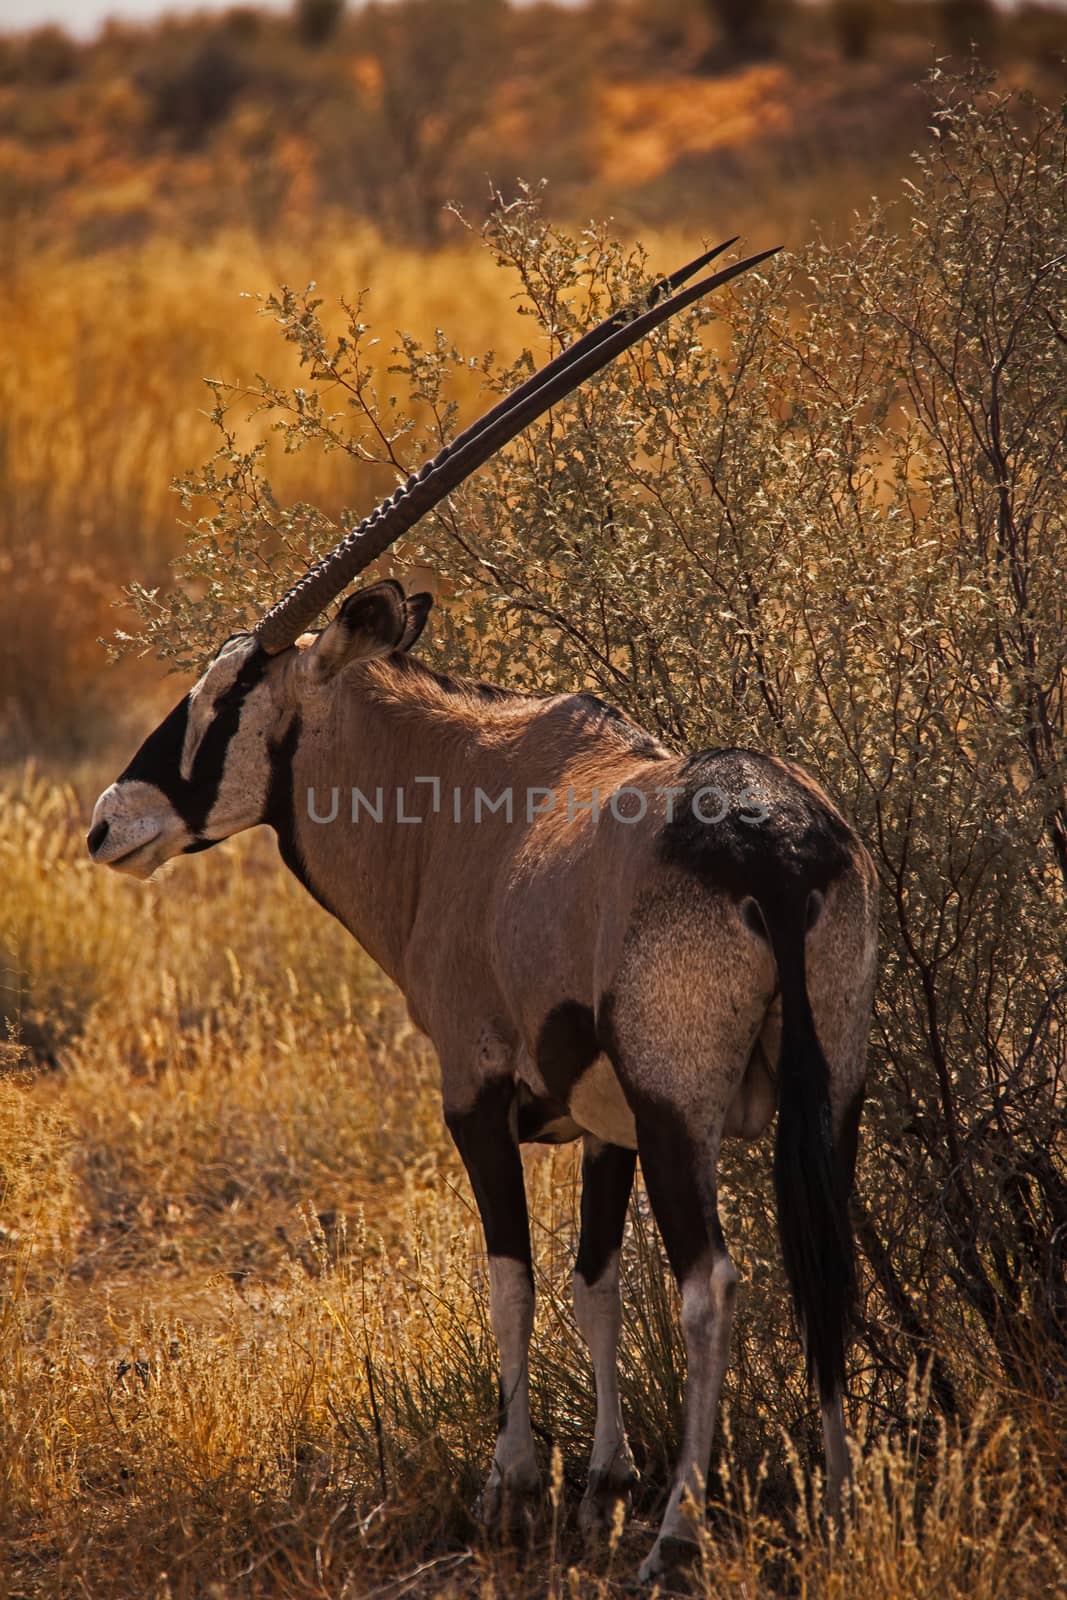 Single Oryx in Kgalagadi Trans Frontier Park 4508 by kobus_peche